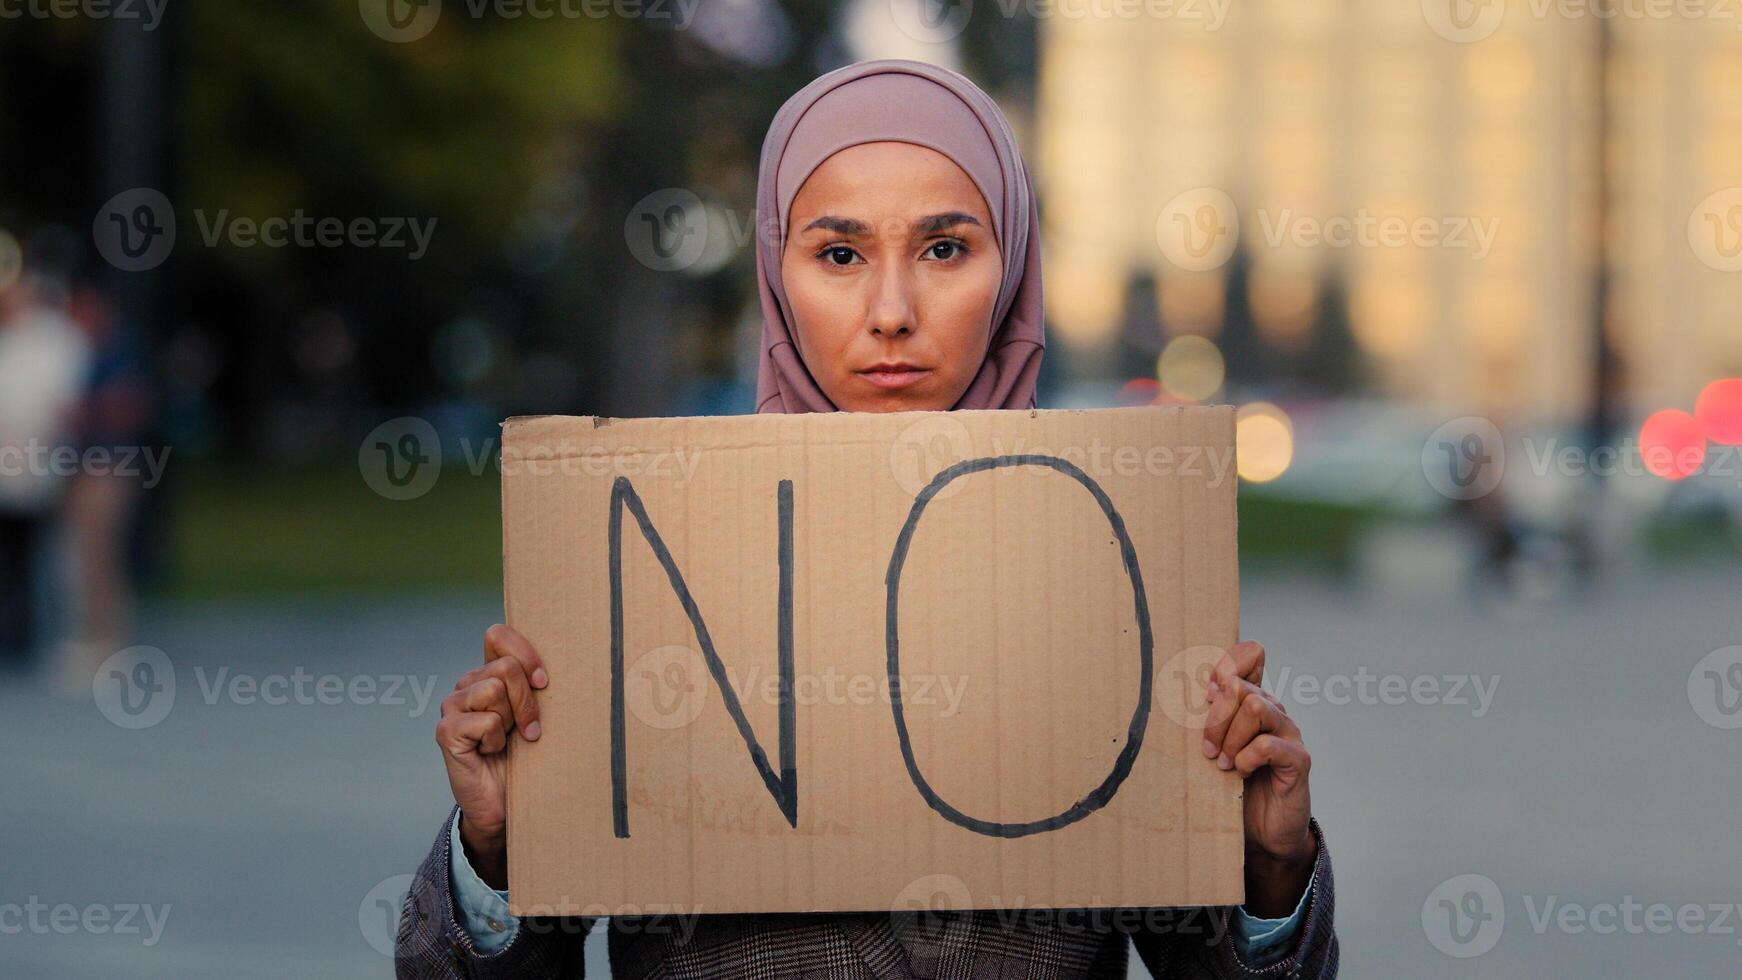 Stop racism No concept Arab immigrant Muslim woman in hijab protests against discrimination vax vaccination standing in city. Islamic girl holding cardboard slogan banner with text no disagree refusal photo